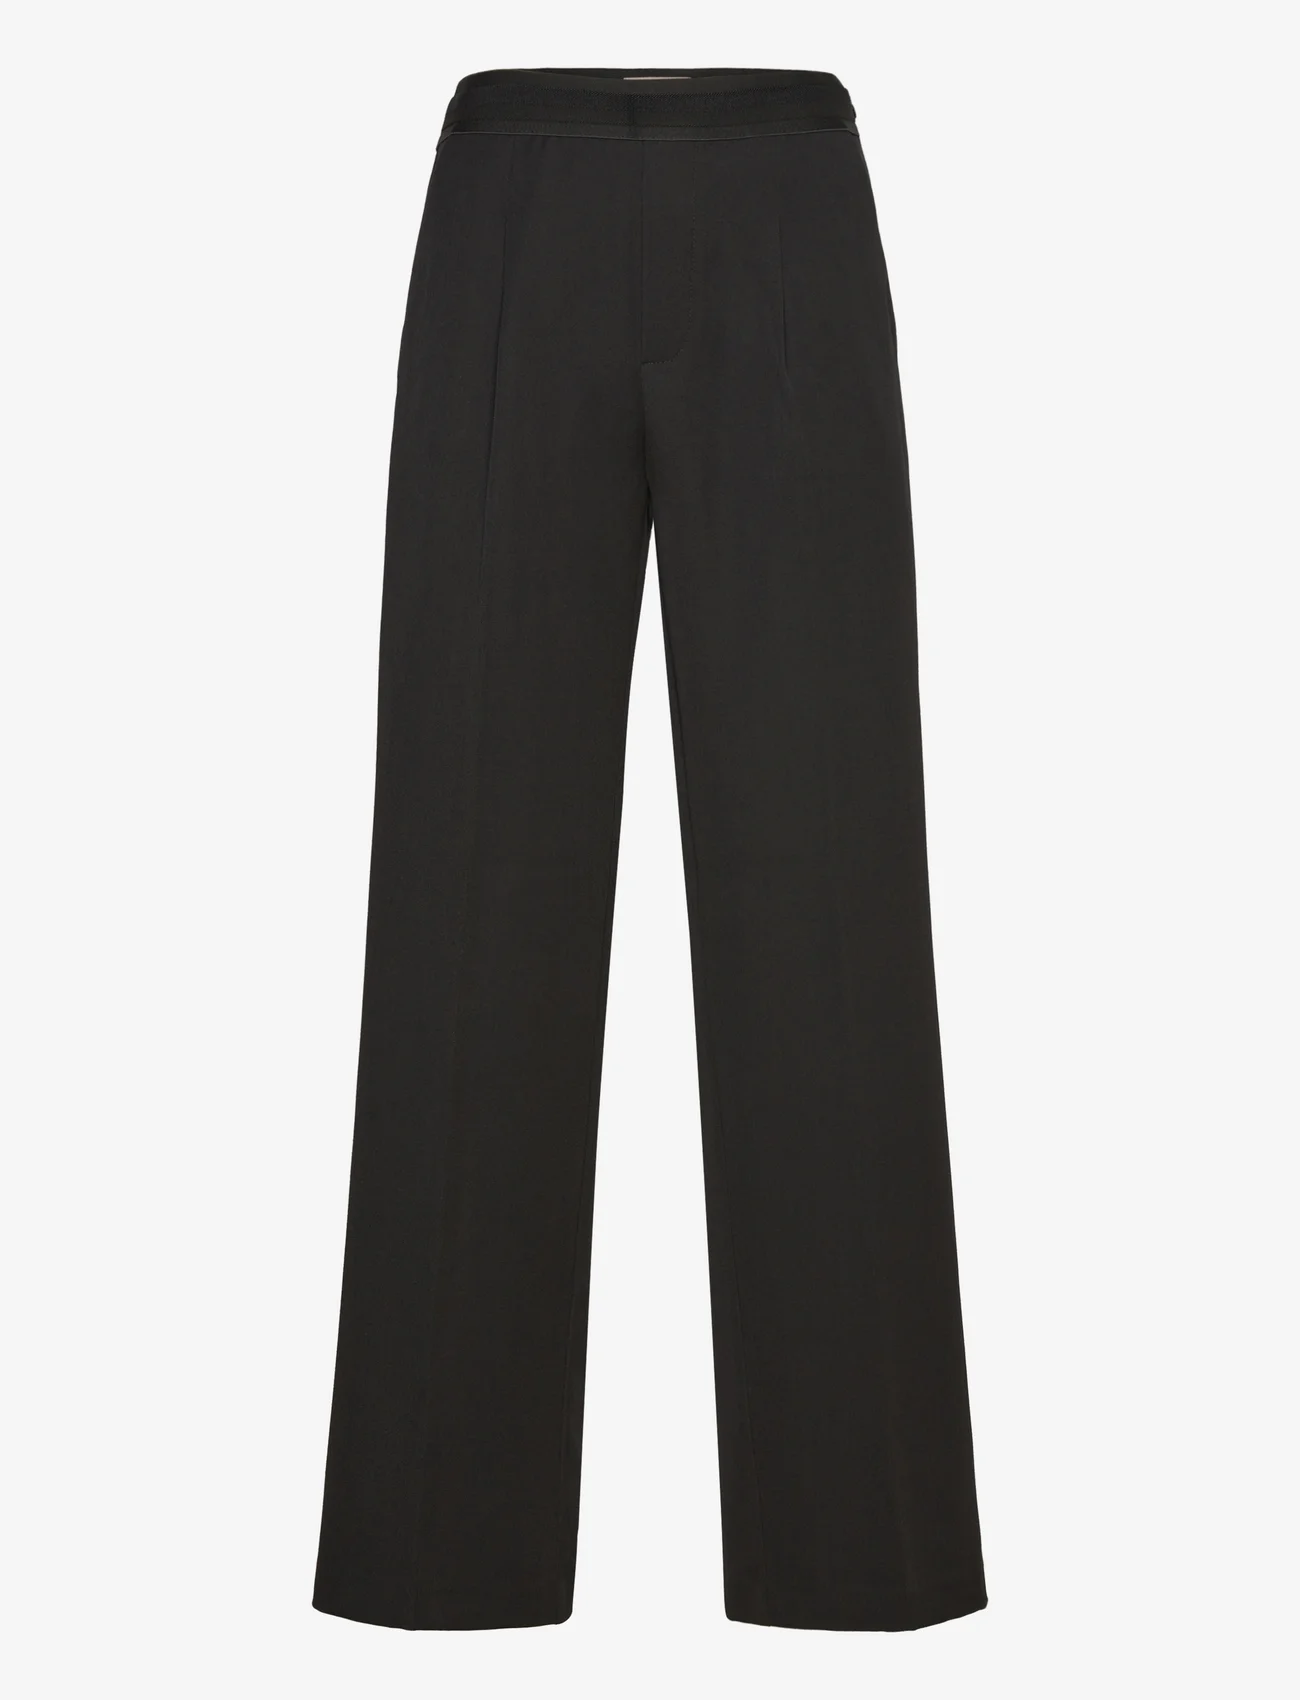 FREE/QUENT - FQKITTY-PANT - wide leg trousers - black - 0